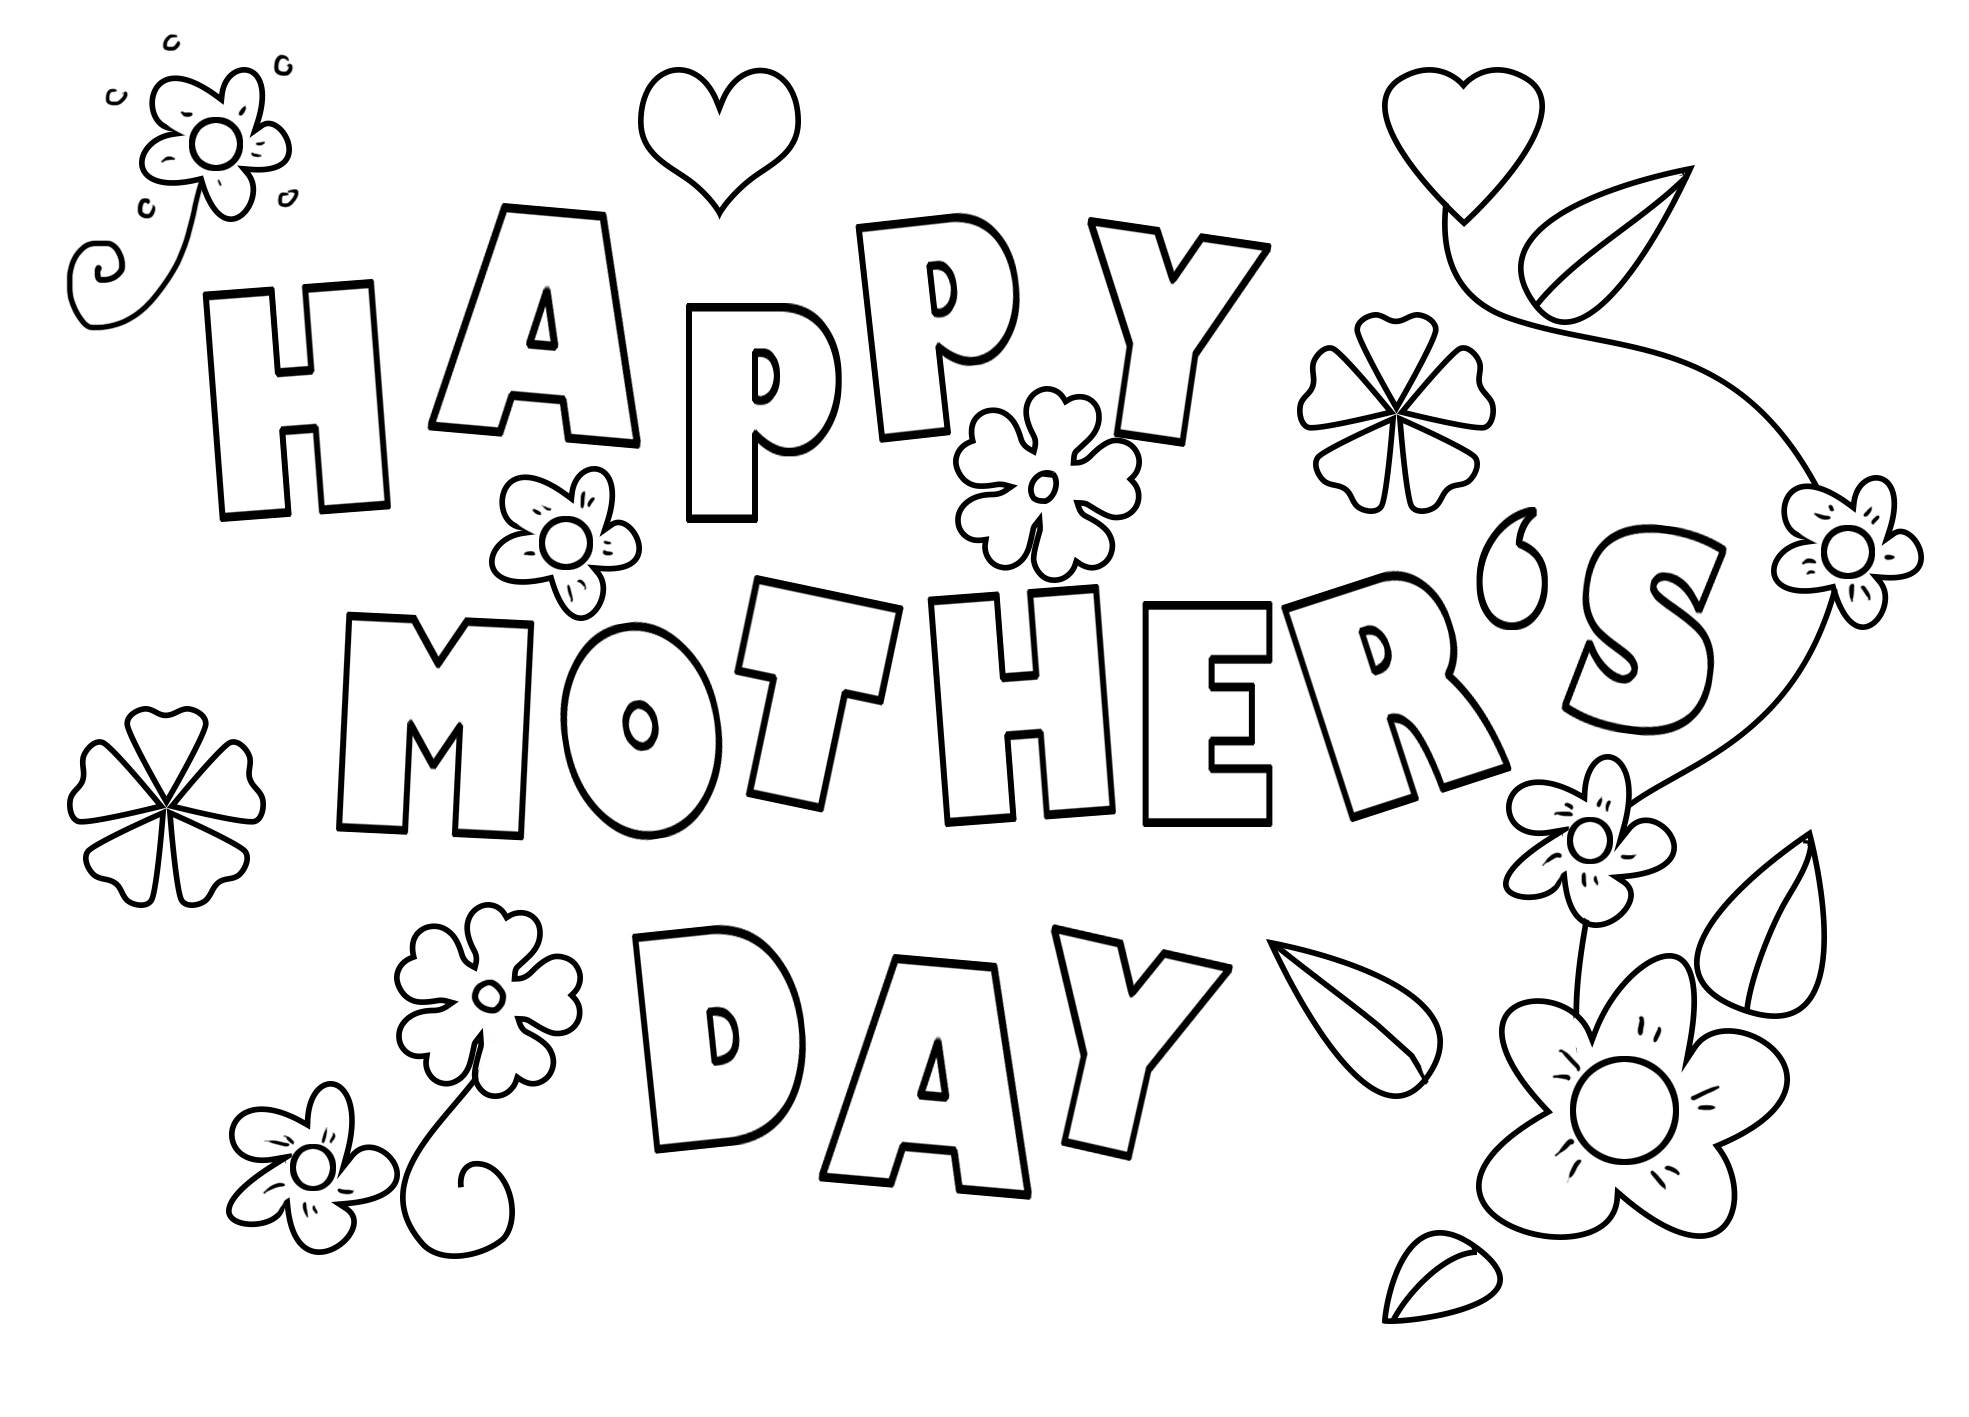 mother-s-day-printable-coloring-sheets